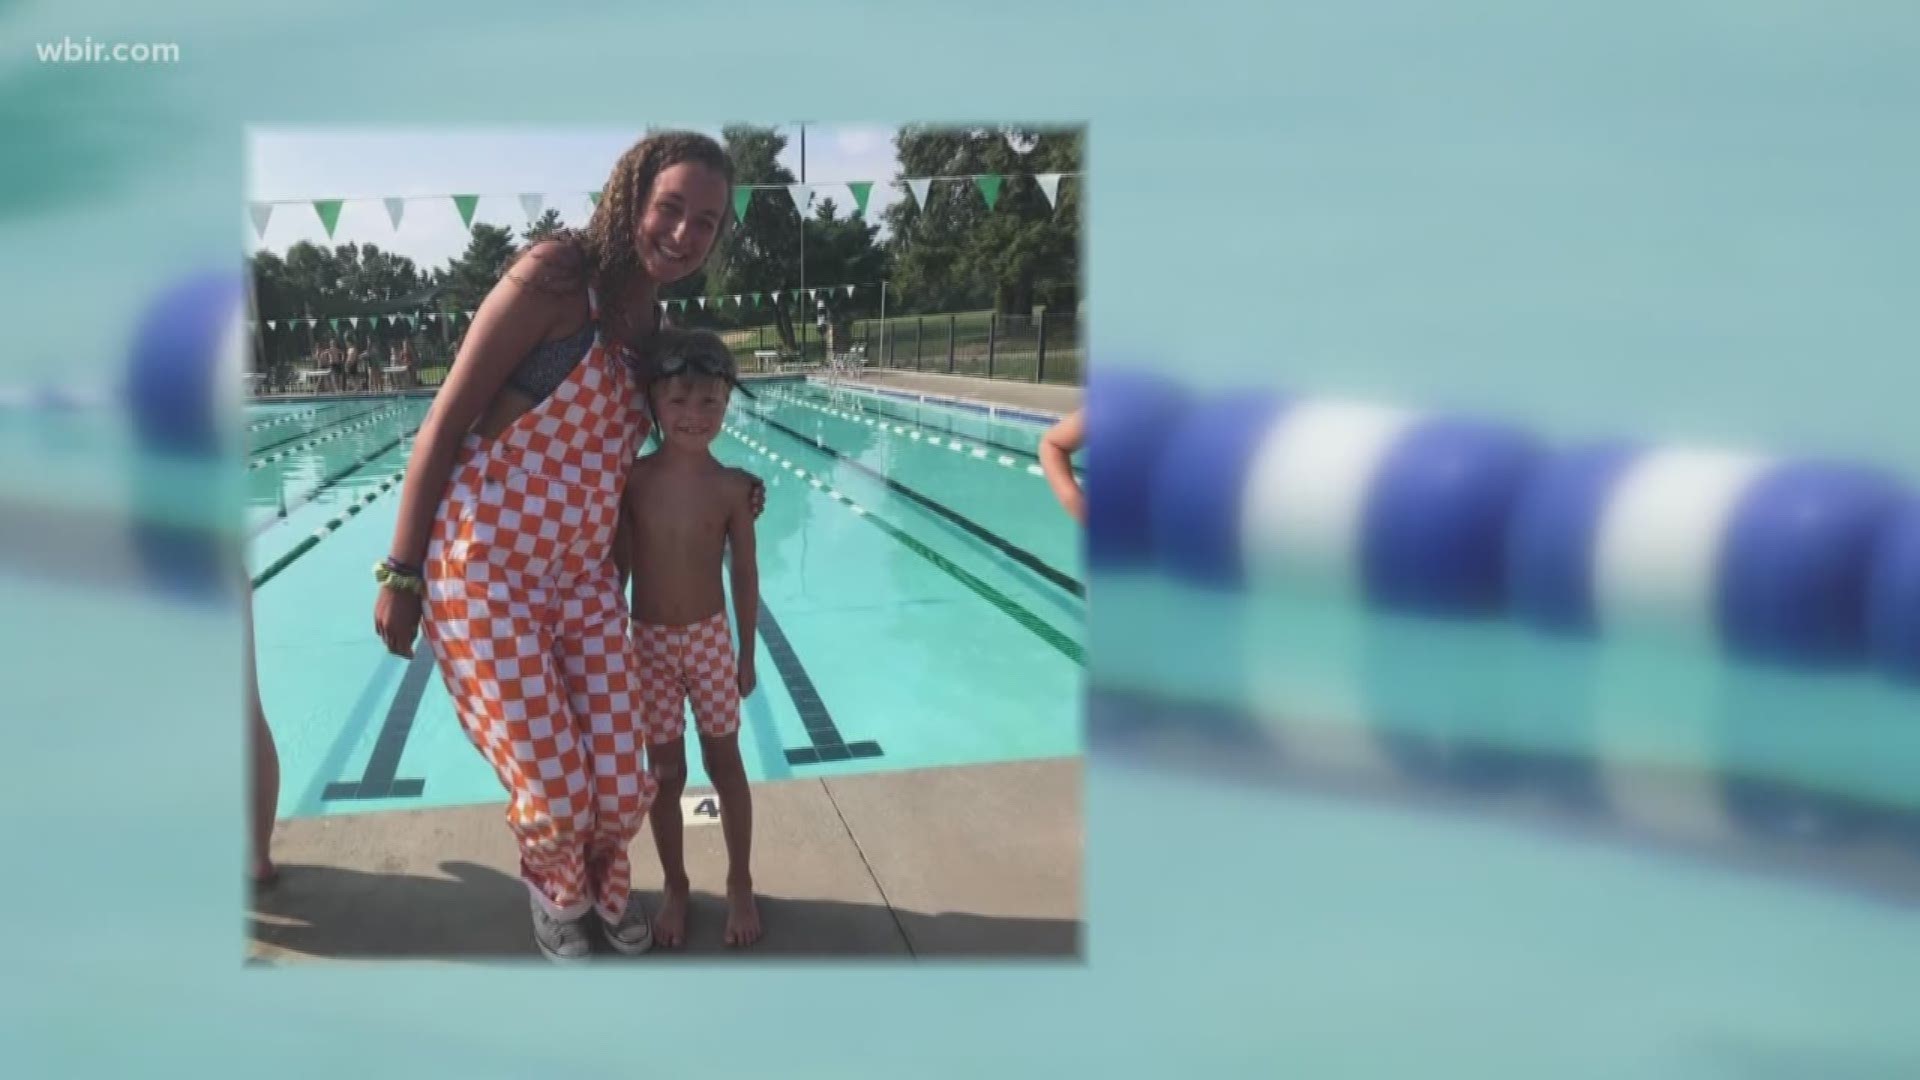 An East Tennessee swim team pauses to honor the life of an eight year old boy. Plus, hear from the mother of fallen Maryville Police Officer Kenny Moats about her son, and her plea to help keep other officers safe after the TBI said cases of violence against officers rose for another year.